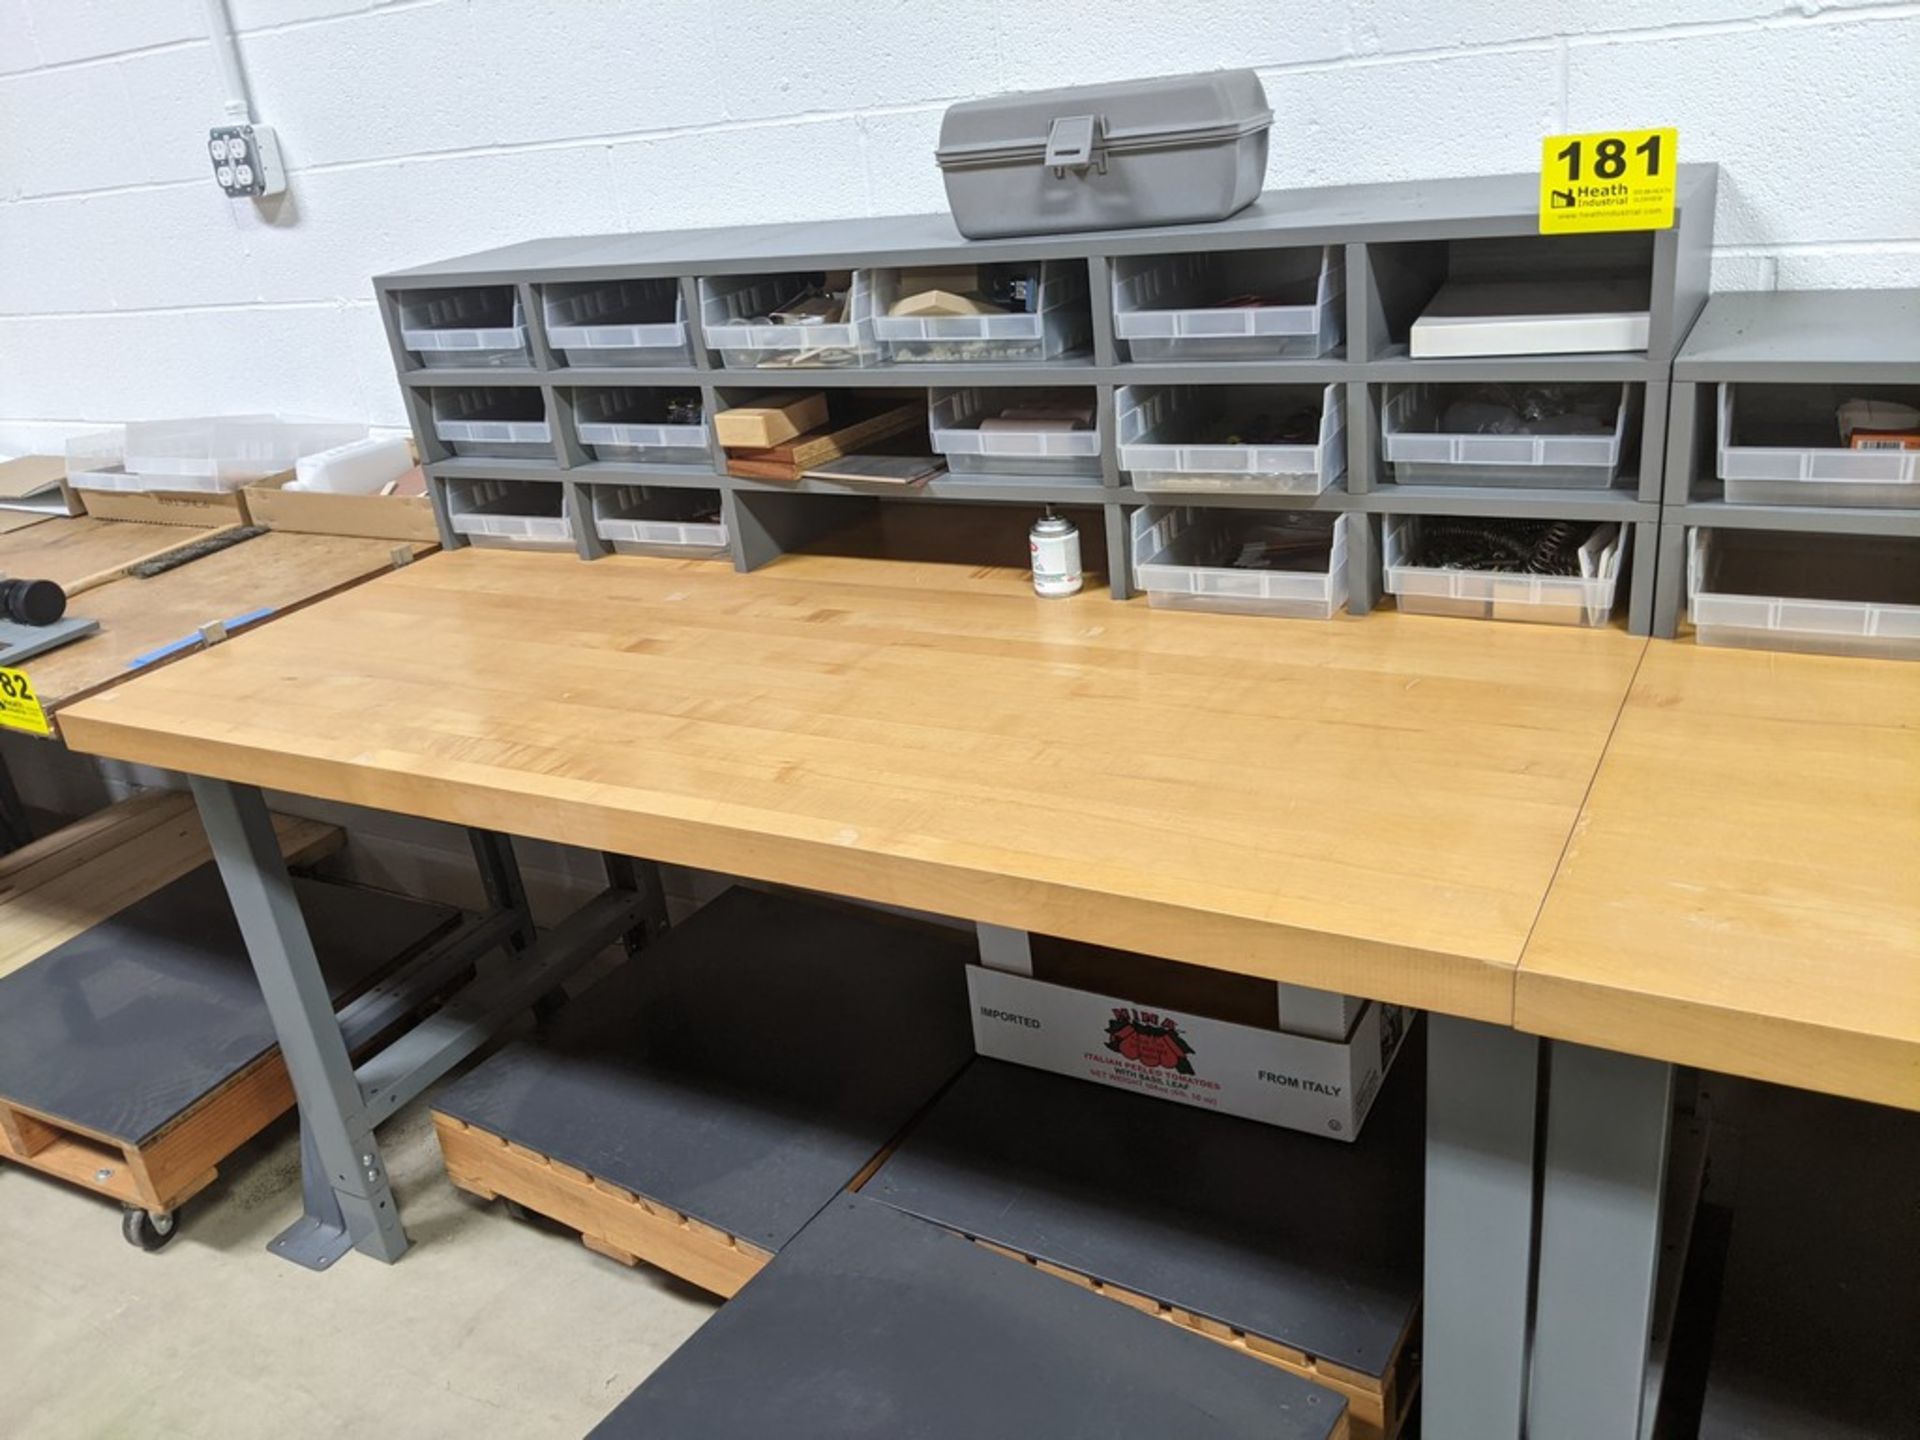 60" X 34" X 34" H MAPLE TOP STEEL FRAME WORK BENCH WITH DRAWERS